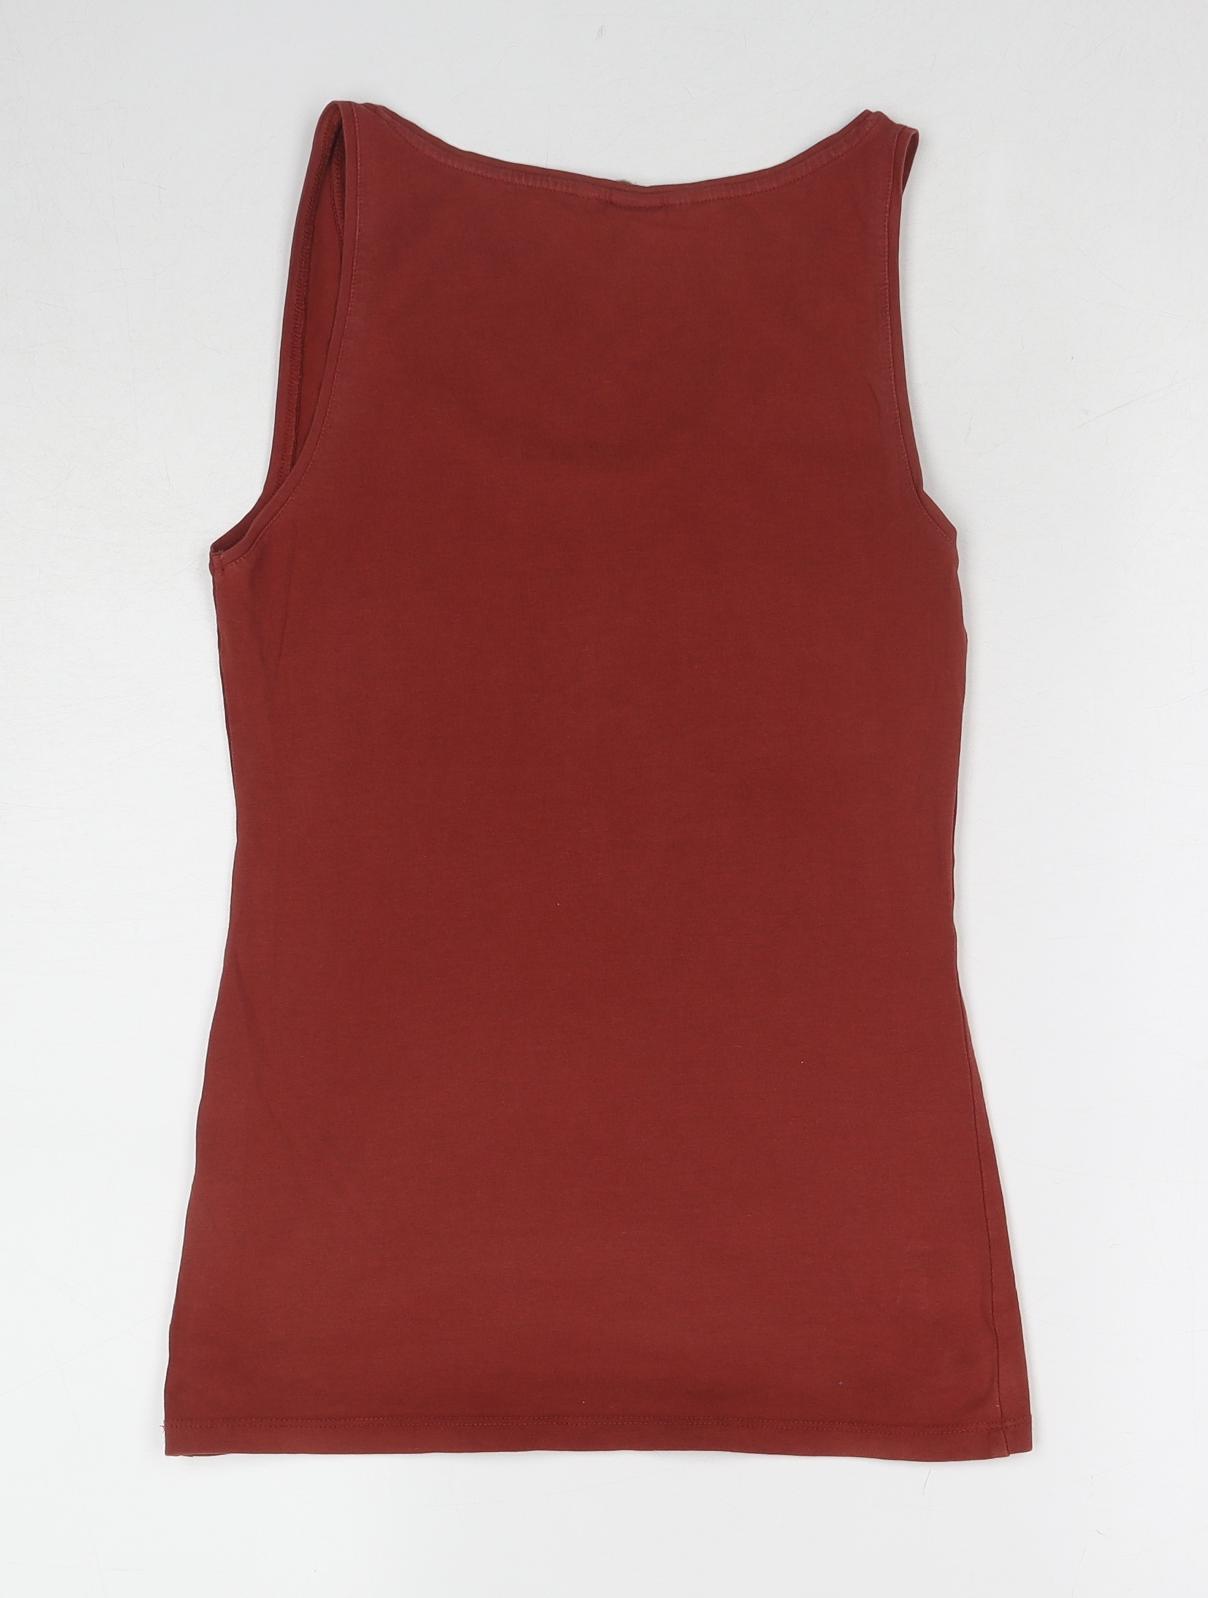 H&M Womens Brown Cotton Basic Tank Size S Scoop Neck